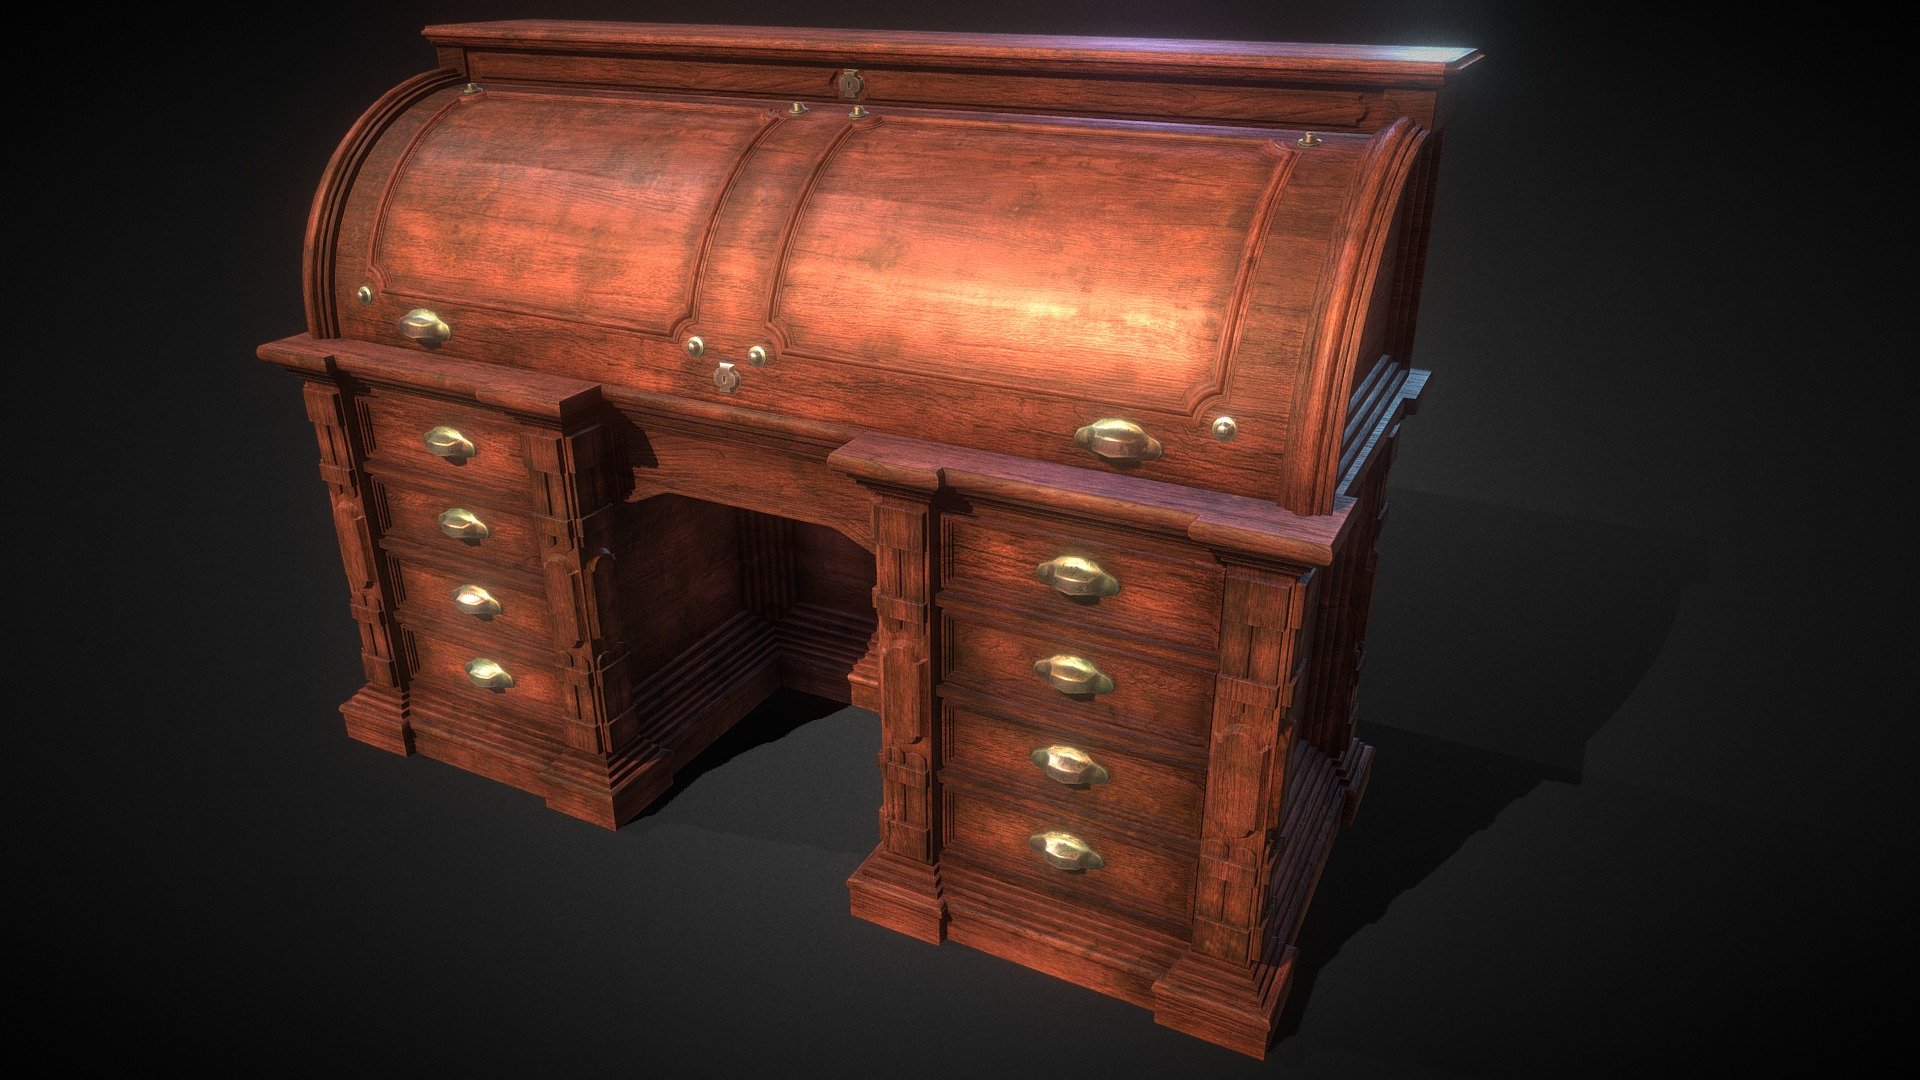 This Antique Wooden Desk was made in Maya and Photoshop and Quixel Suite. It is suitable for use in a video game as a high LOD. It has PBR Textures 3d model